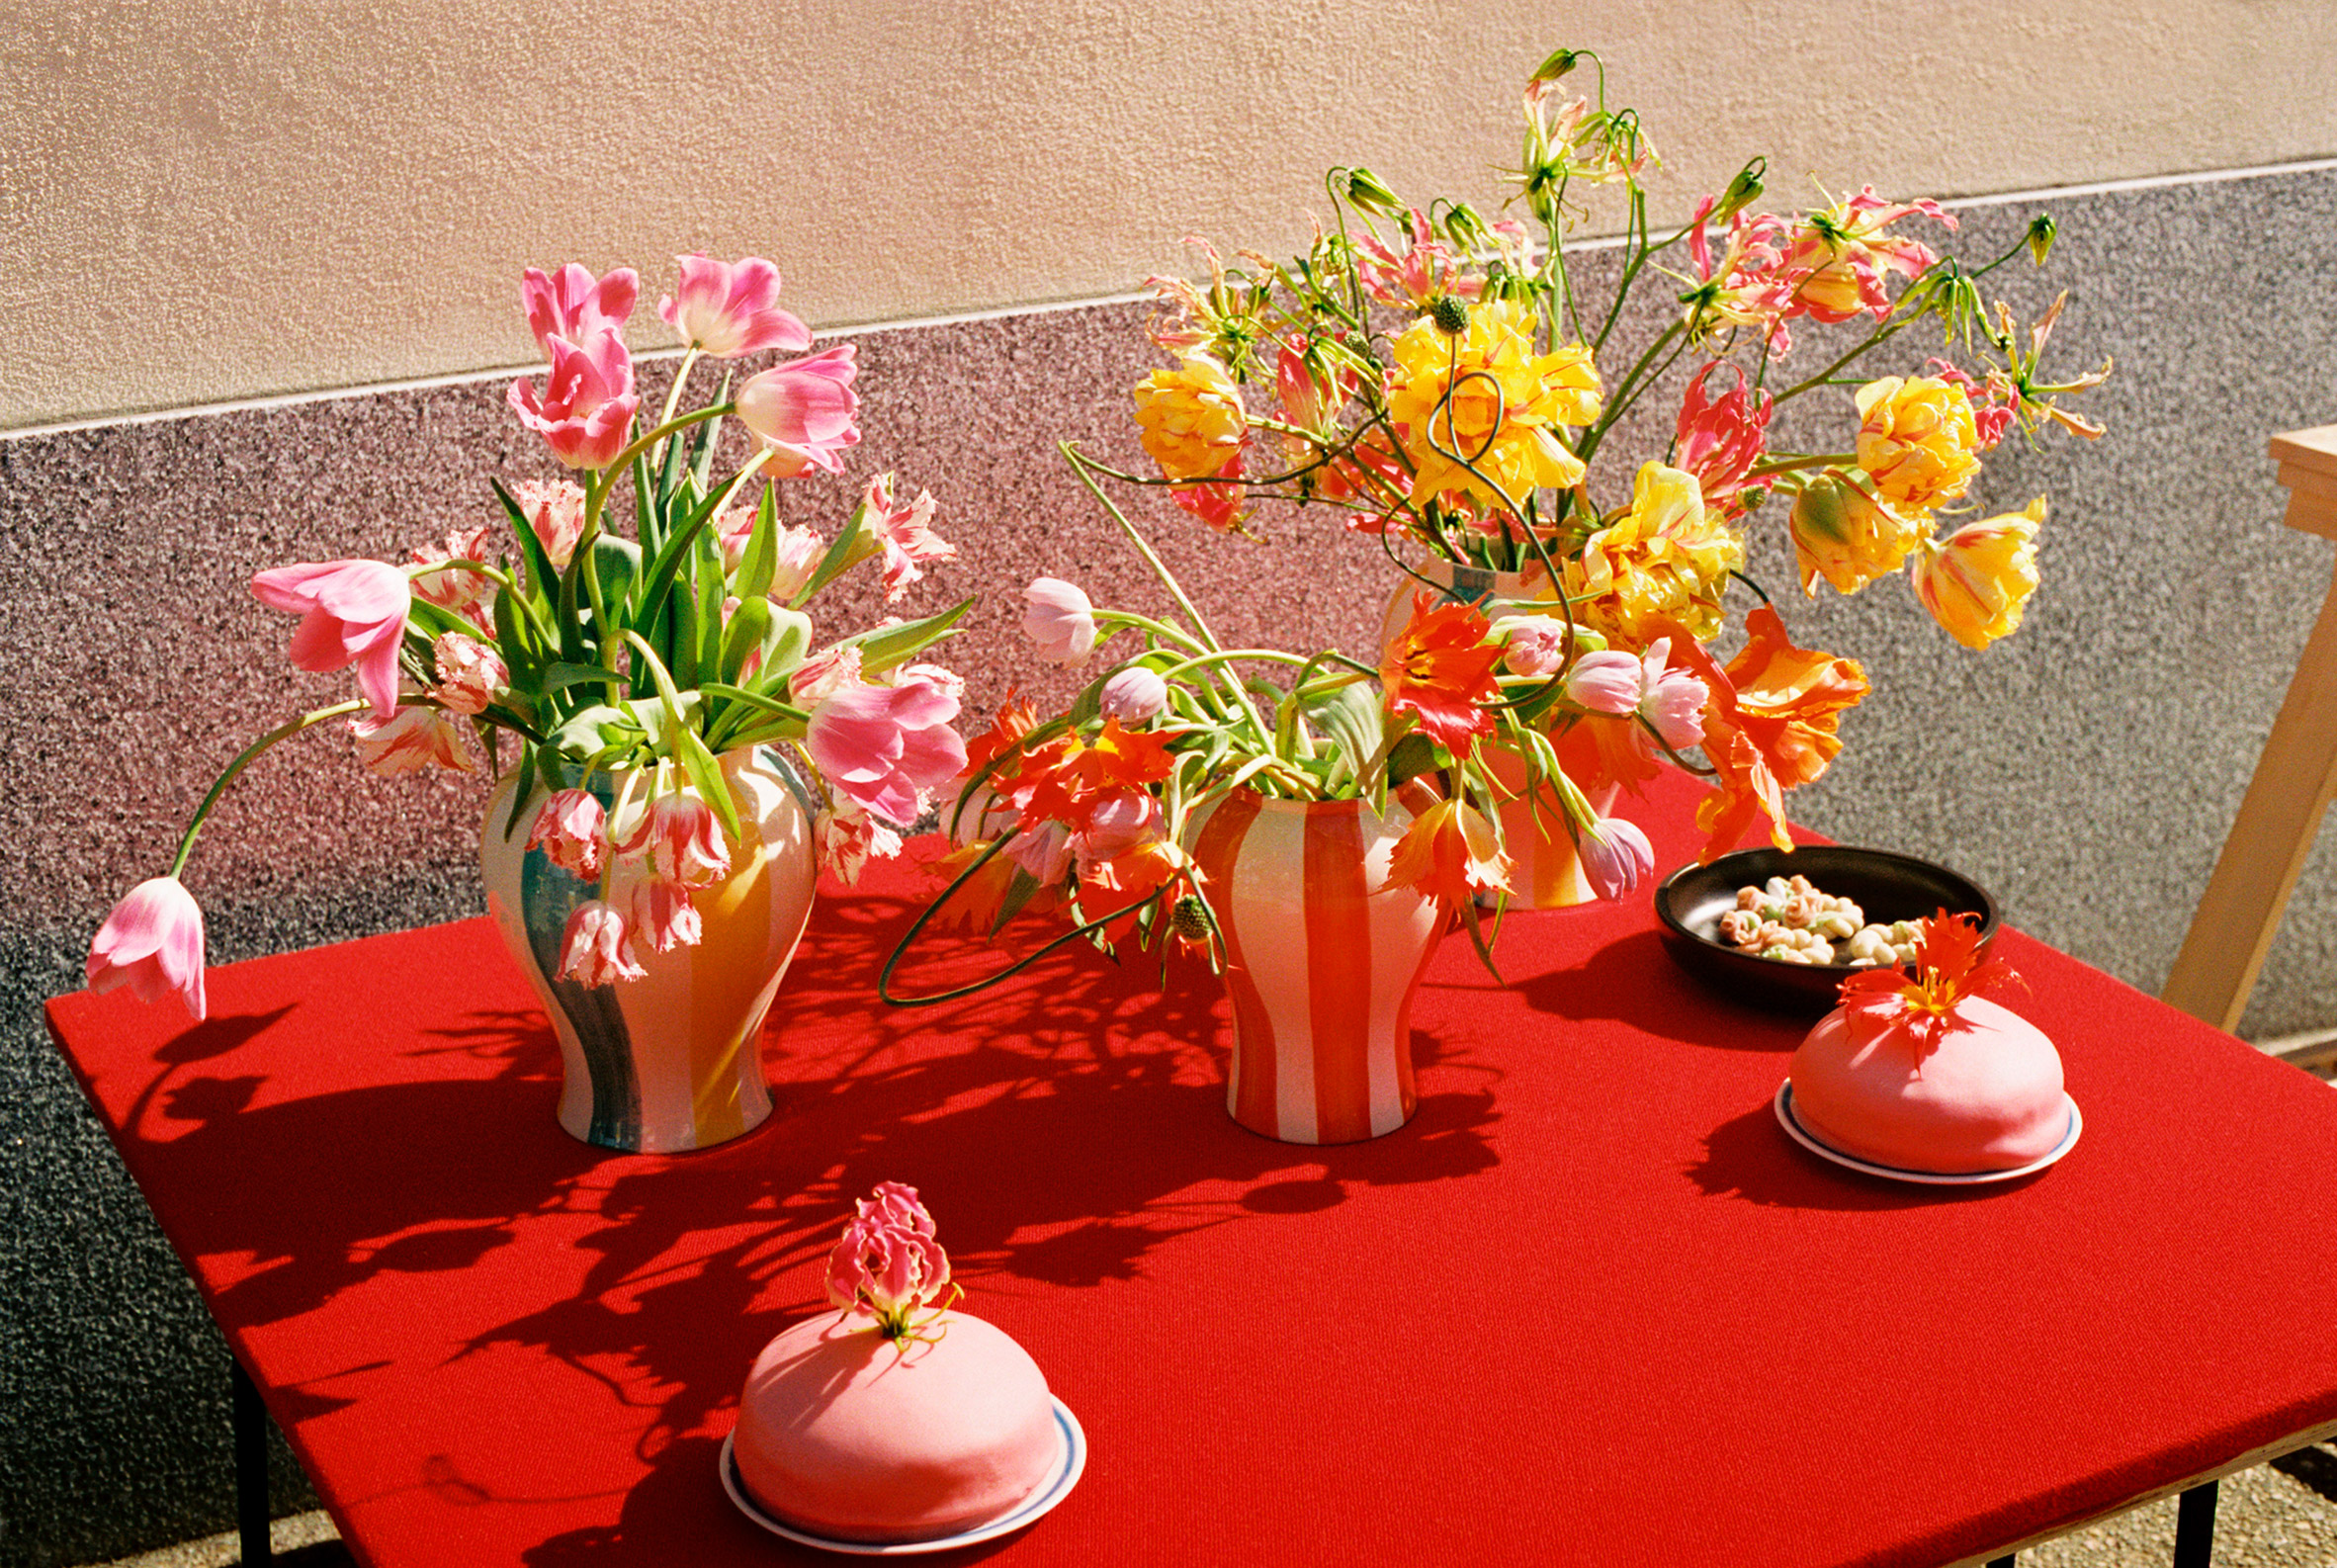 Red table with colourful vases filled with flowers